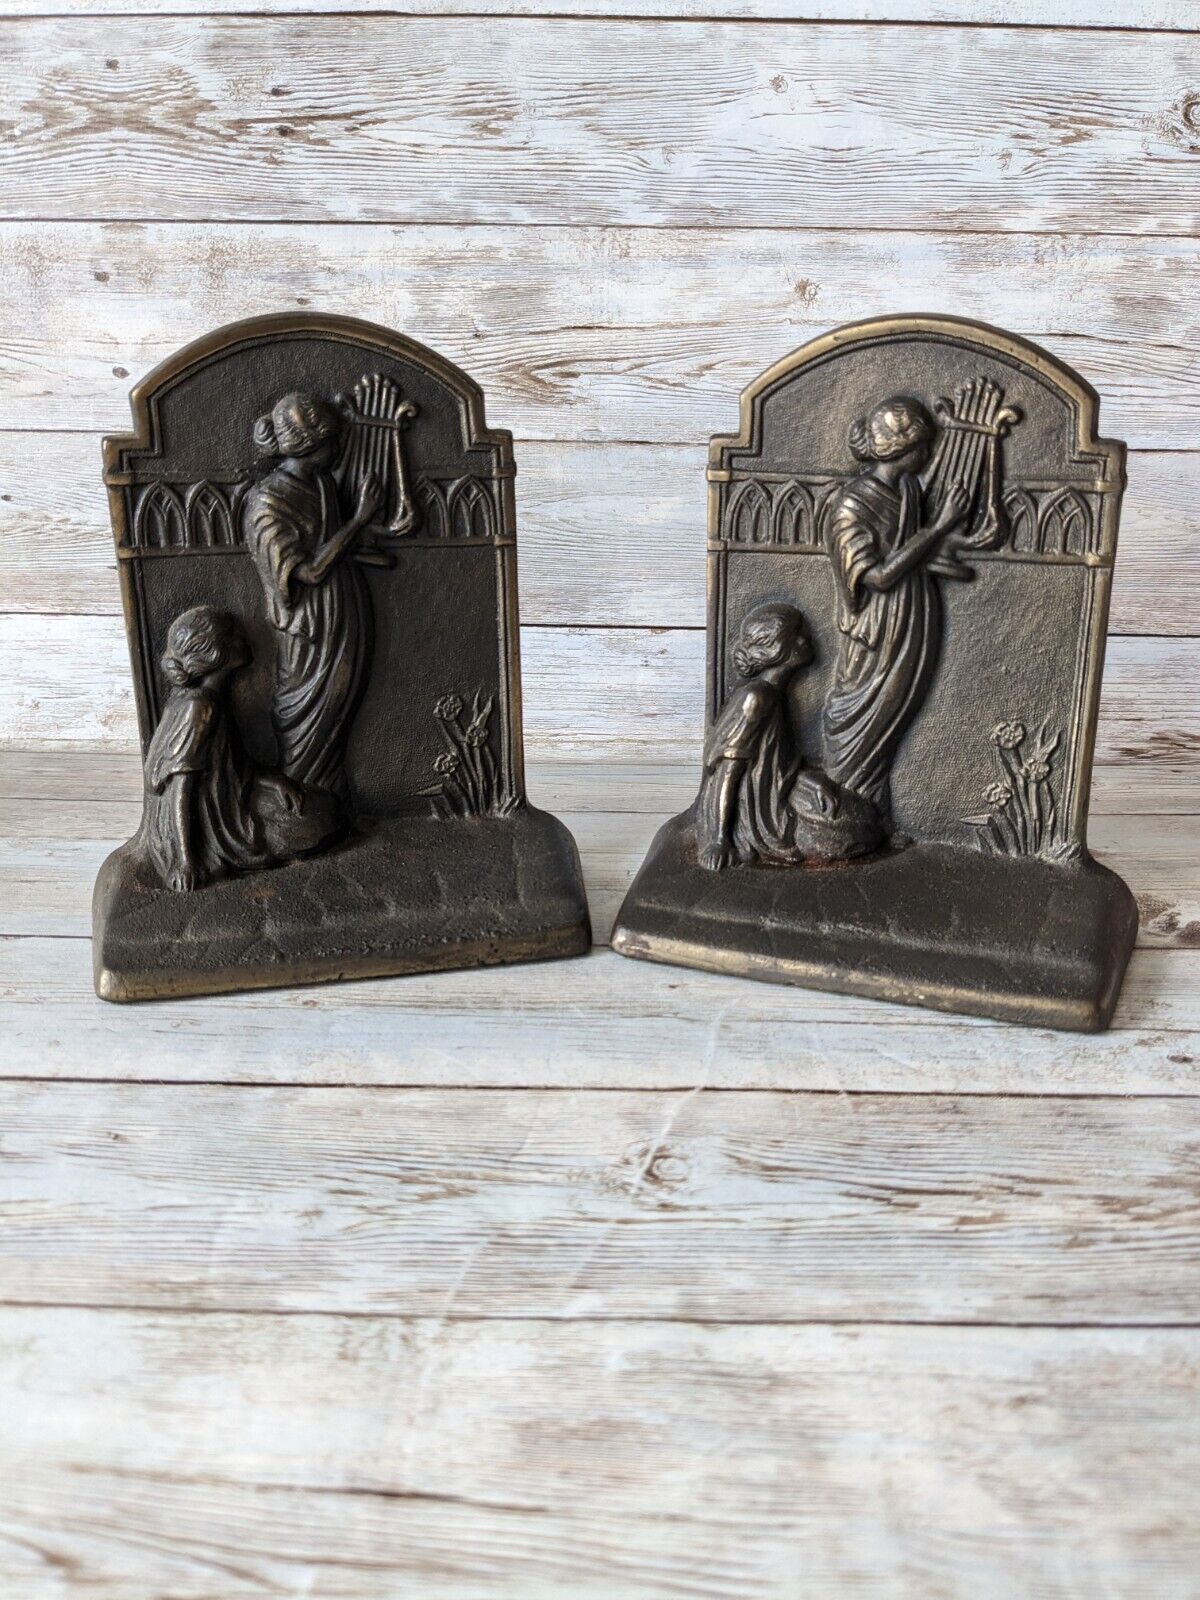 Vintage Hubley 328 Girl With Lyre Erato Goddess Muse Bookends Cast Iron Bronzed